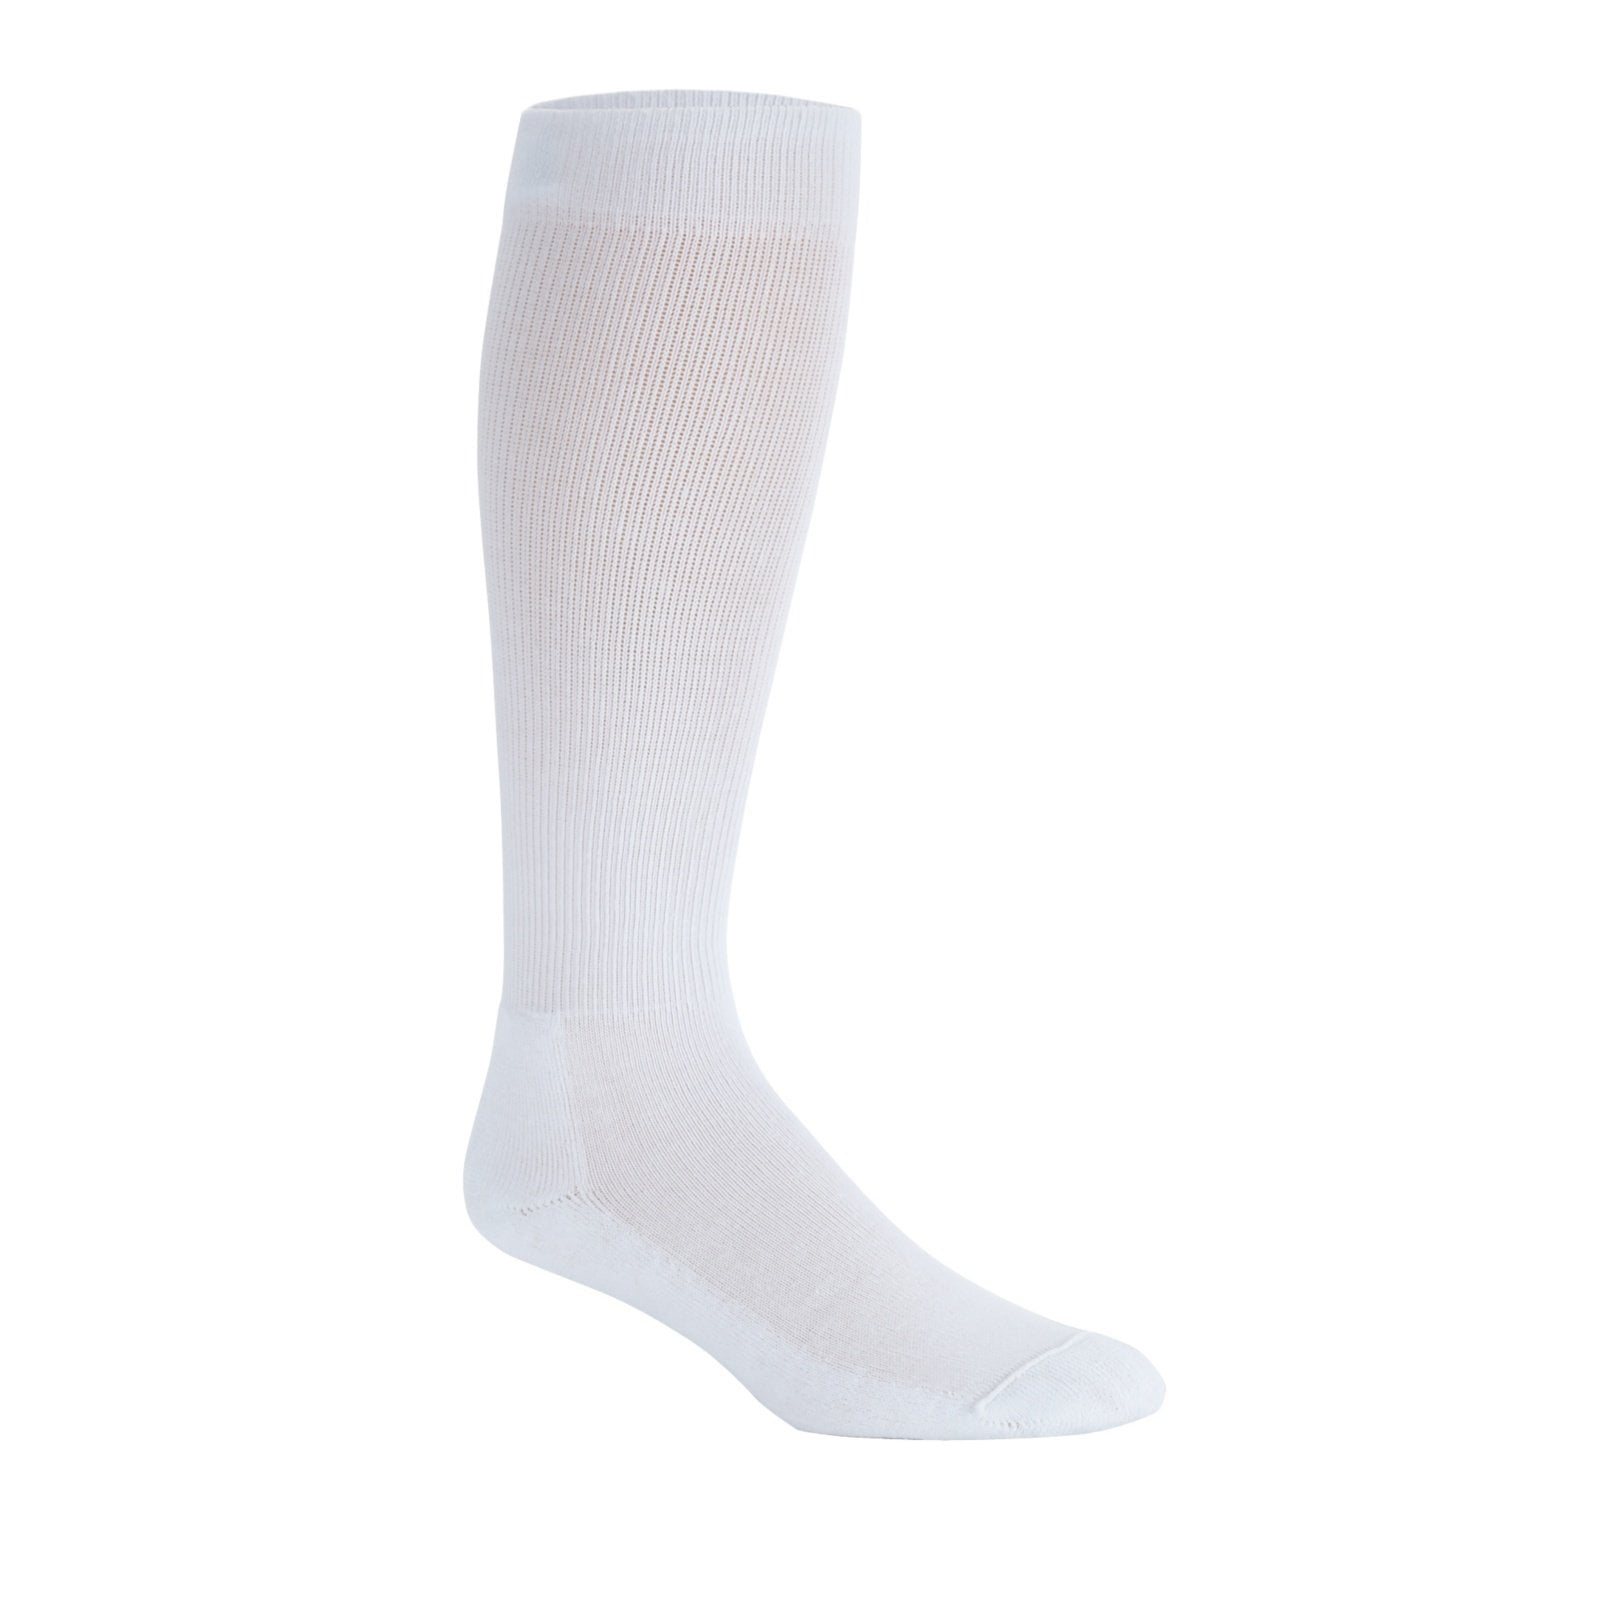 Sigvaris 18-25mmHg Diabetic Compression Over-the-Calf Socks (Women's ...